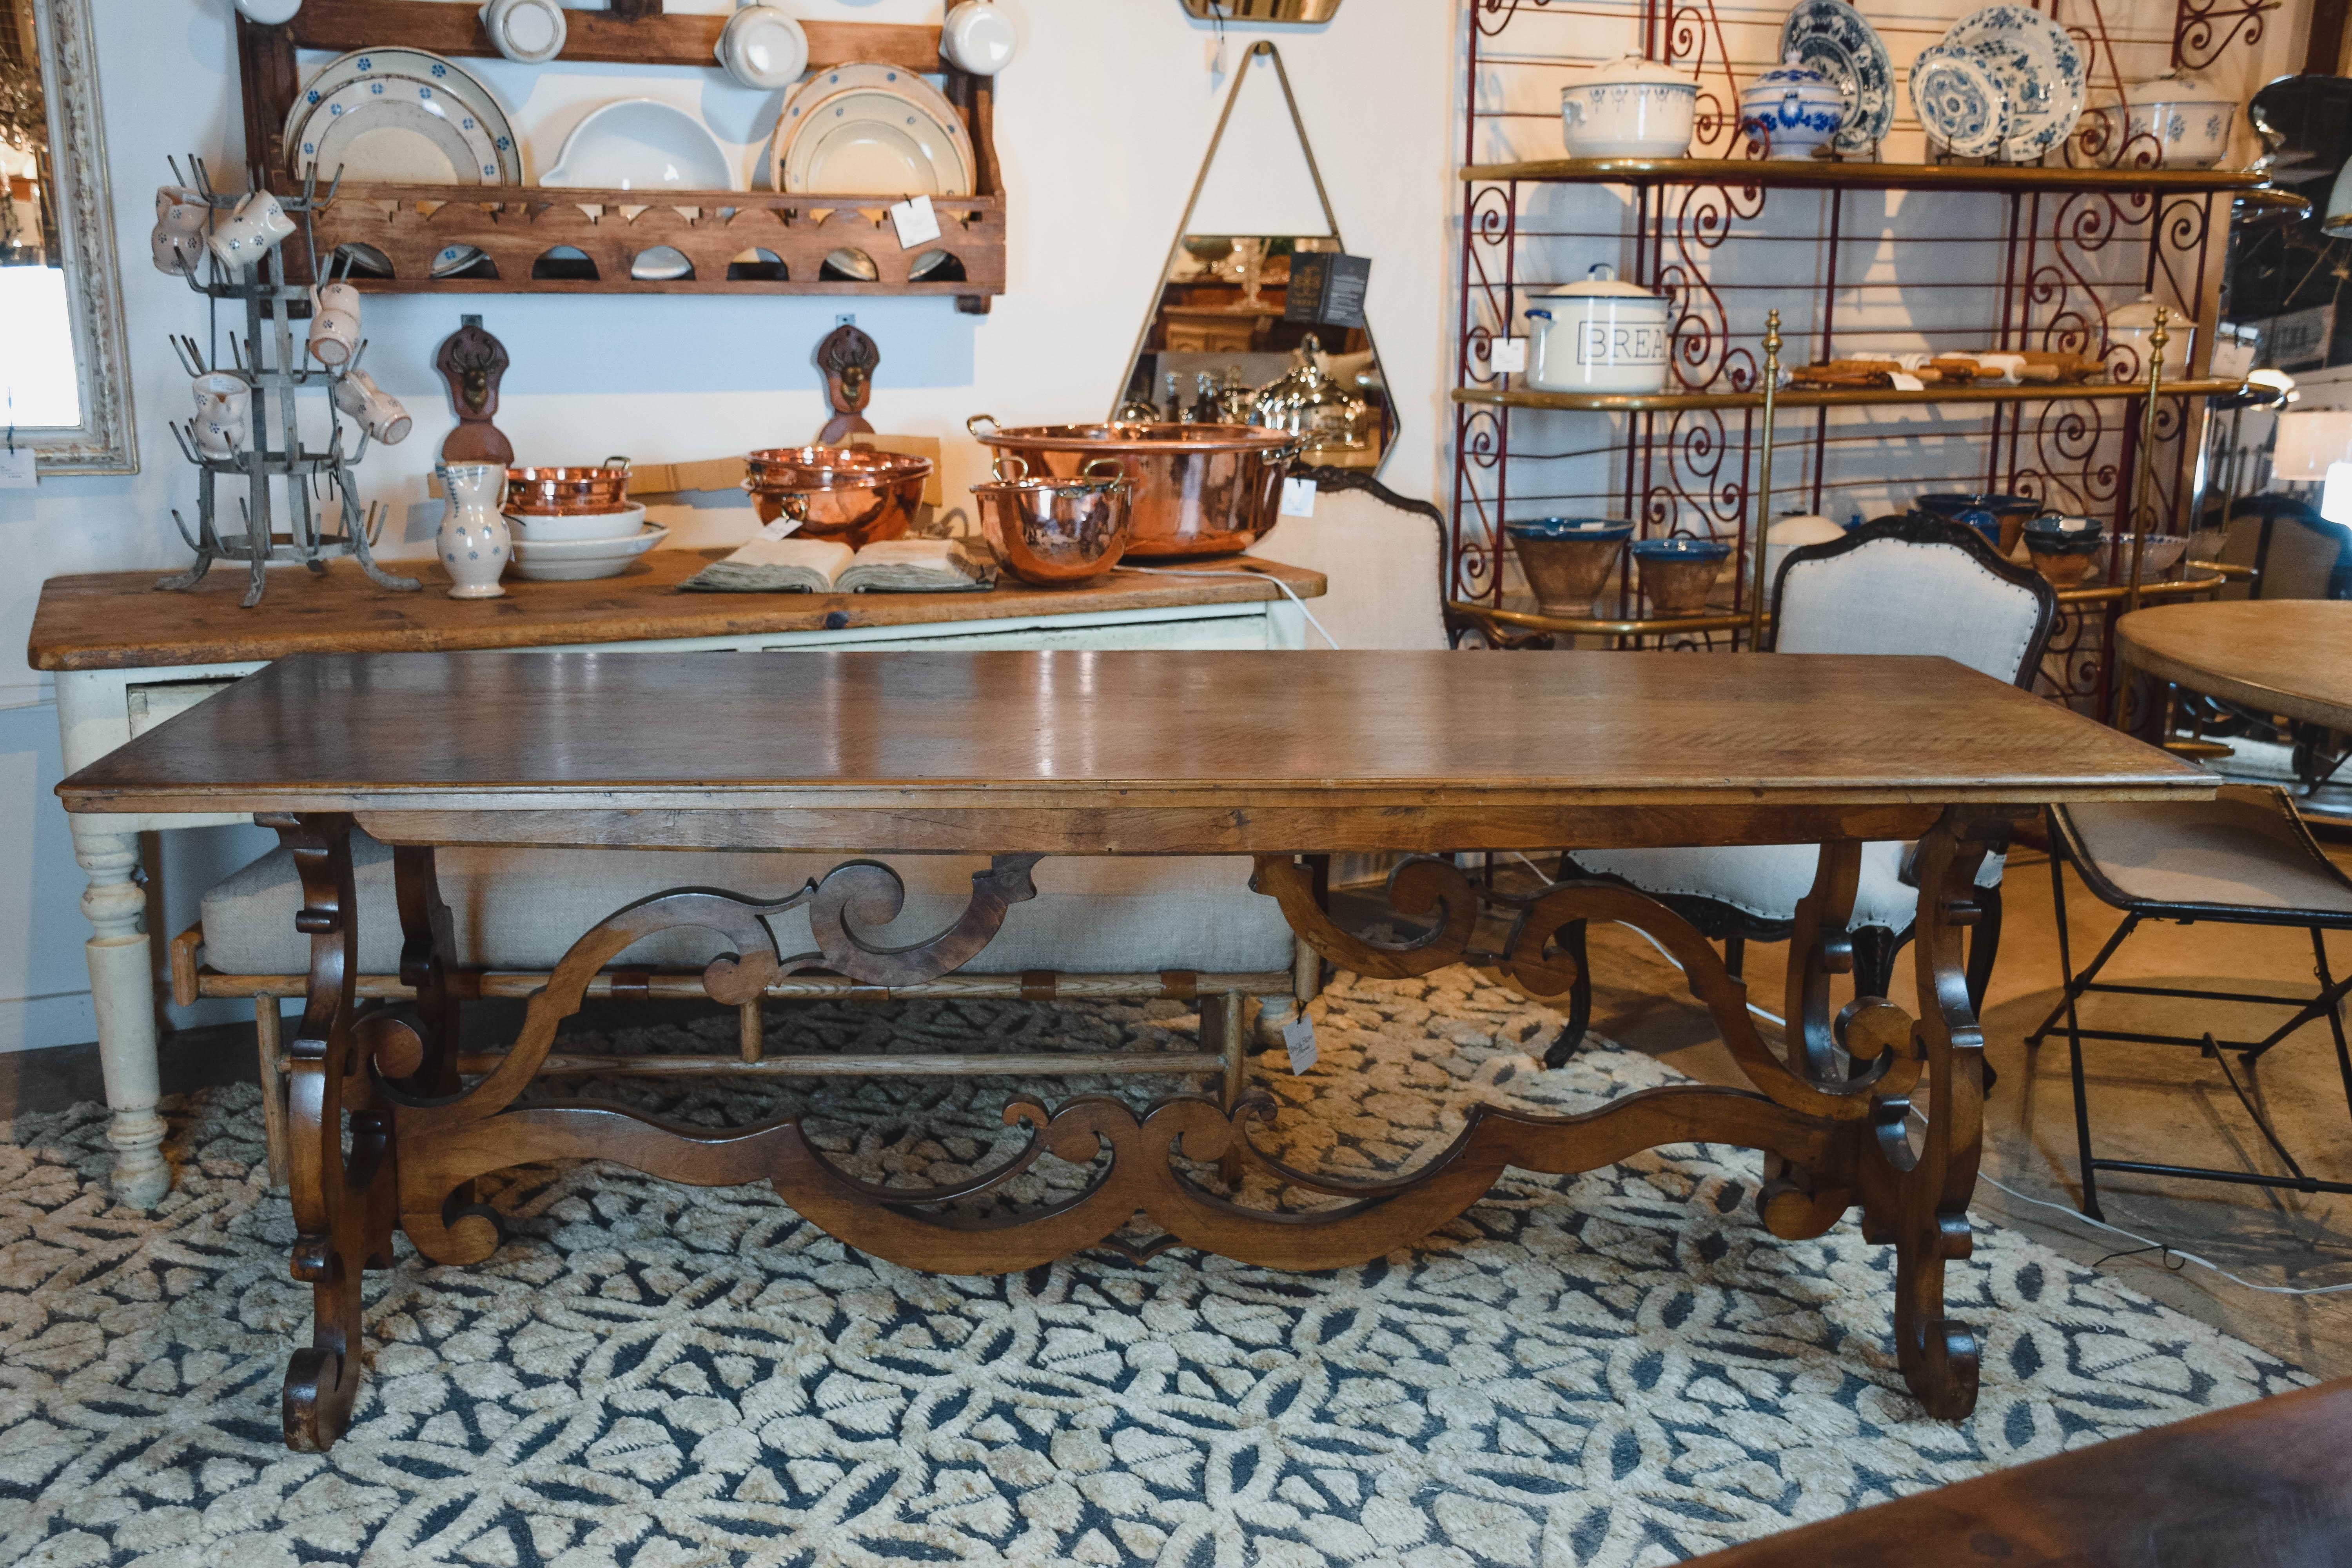 This 19th century Italian Baroque style walnut trestle table handcrafted by artisans in Tuscany has beautiful lyre bases and stretcher. This gorgeous table with its wonderful rich color would seat 10 comfortably, but is also narrow enough to make a